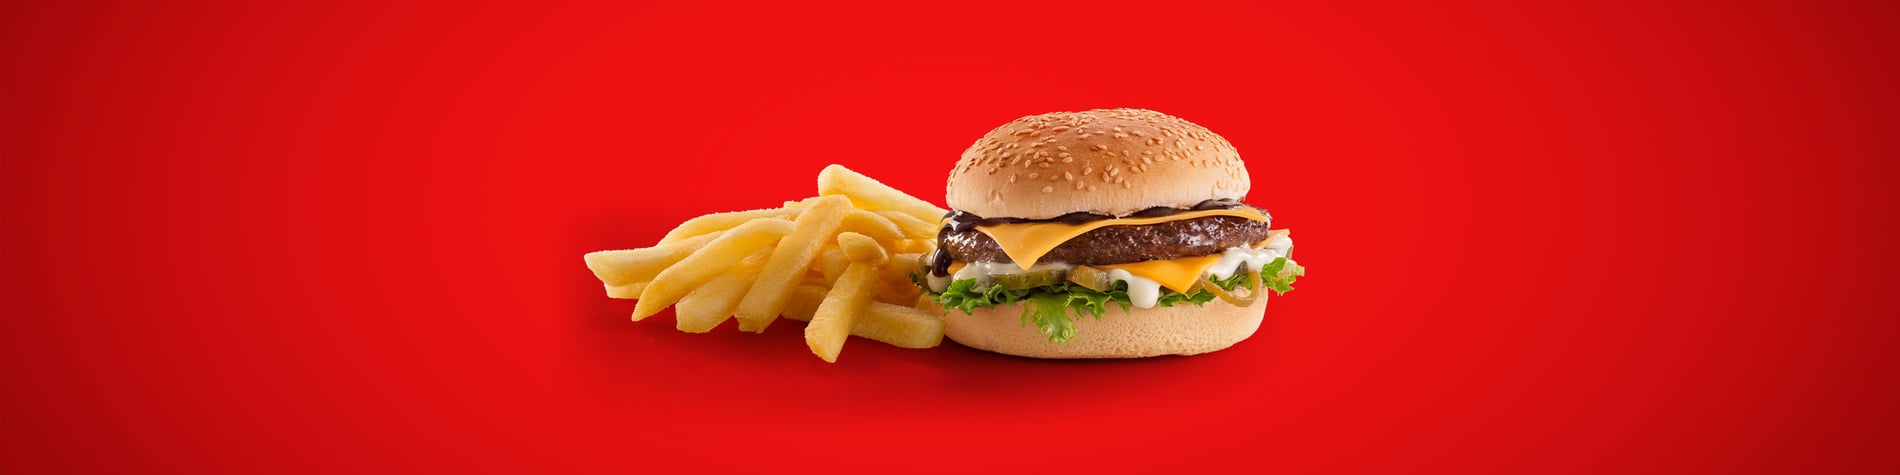 Burger with cheese, BBQ sauce and mayo, next to a portion of chips, set against a red background.